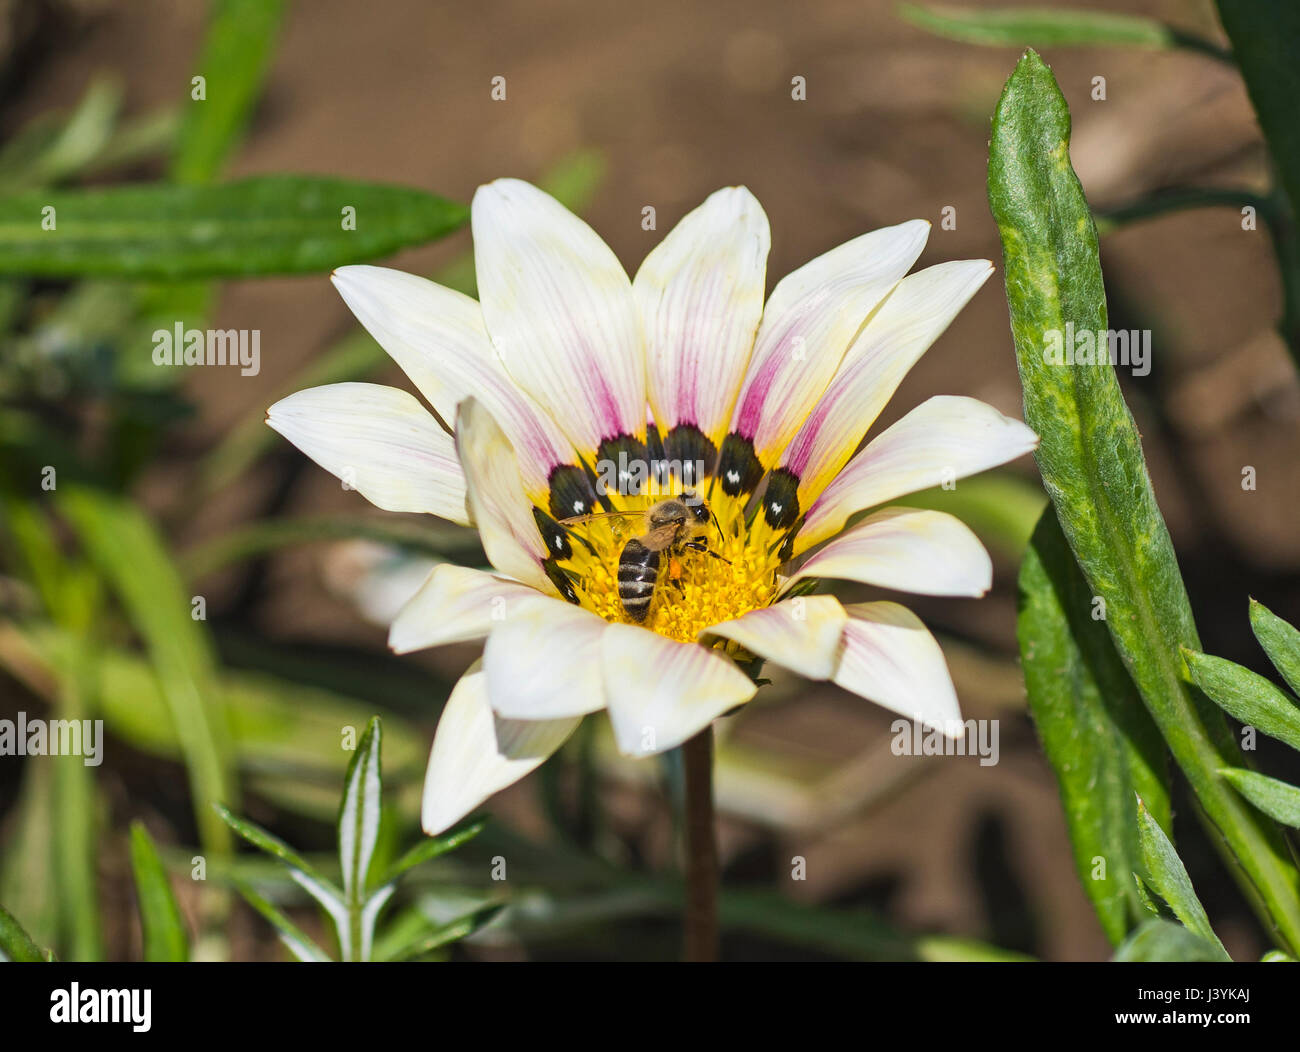 Close-up detail of a honey bee apis collecting pollen on white daisy flower in garden Stock Photo